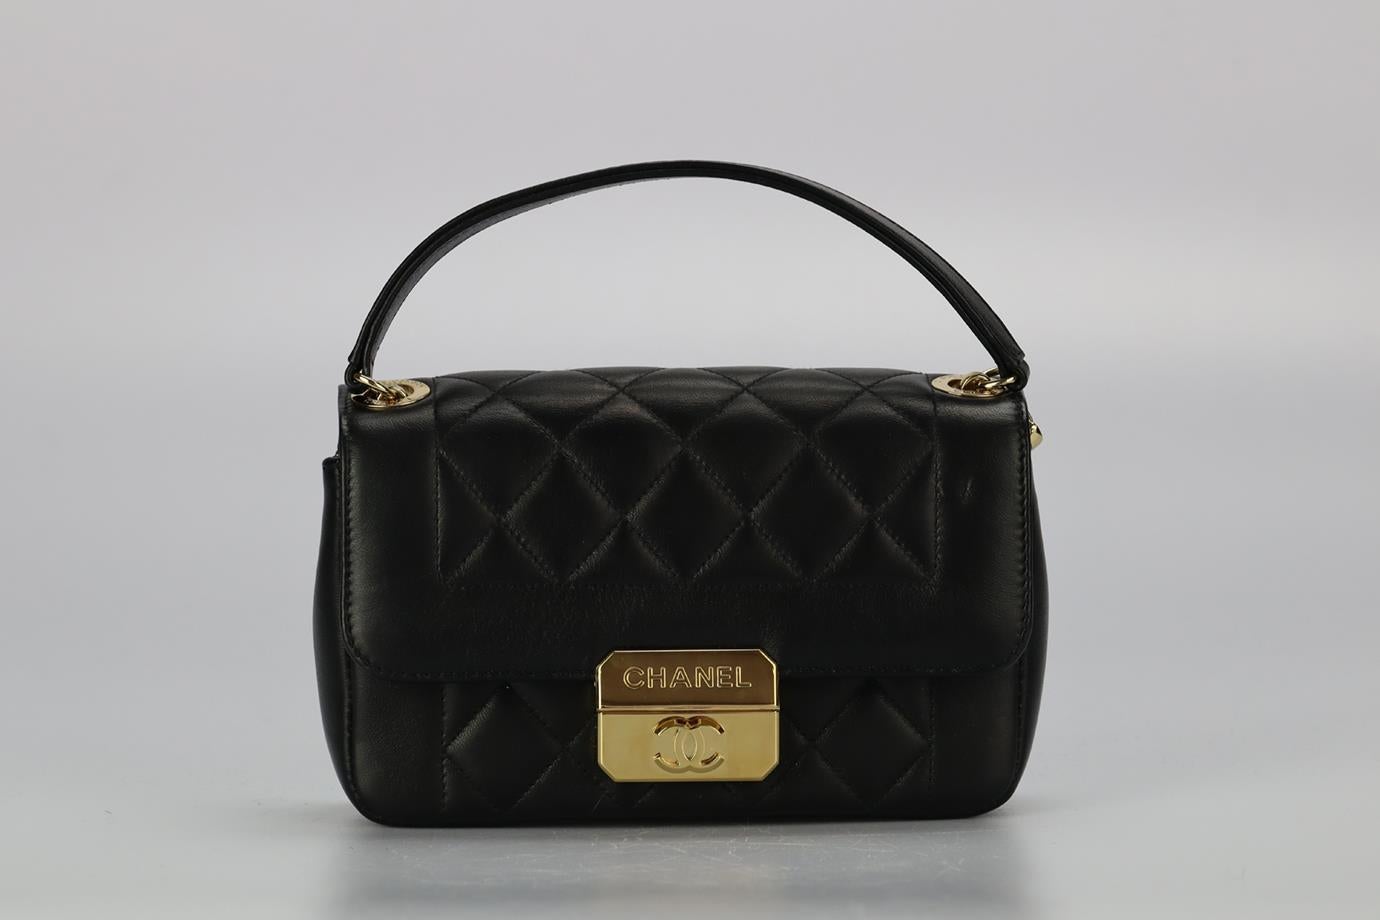 Chanel 2013 Chic With Me Mini Rectangle Flap Quilted Leather Shoulder Bag. Black. Push lock fastening - Front. Comes with - dustbag and authenticity card. Height: 7.7 in. Width: 2.1 in. Depth: 2.1 in. Strap drop: 21.2 in. Condition: Used. Very good